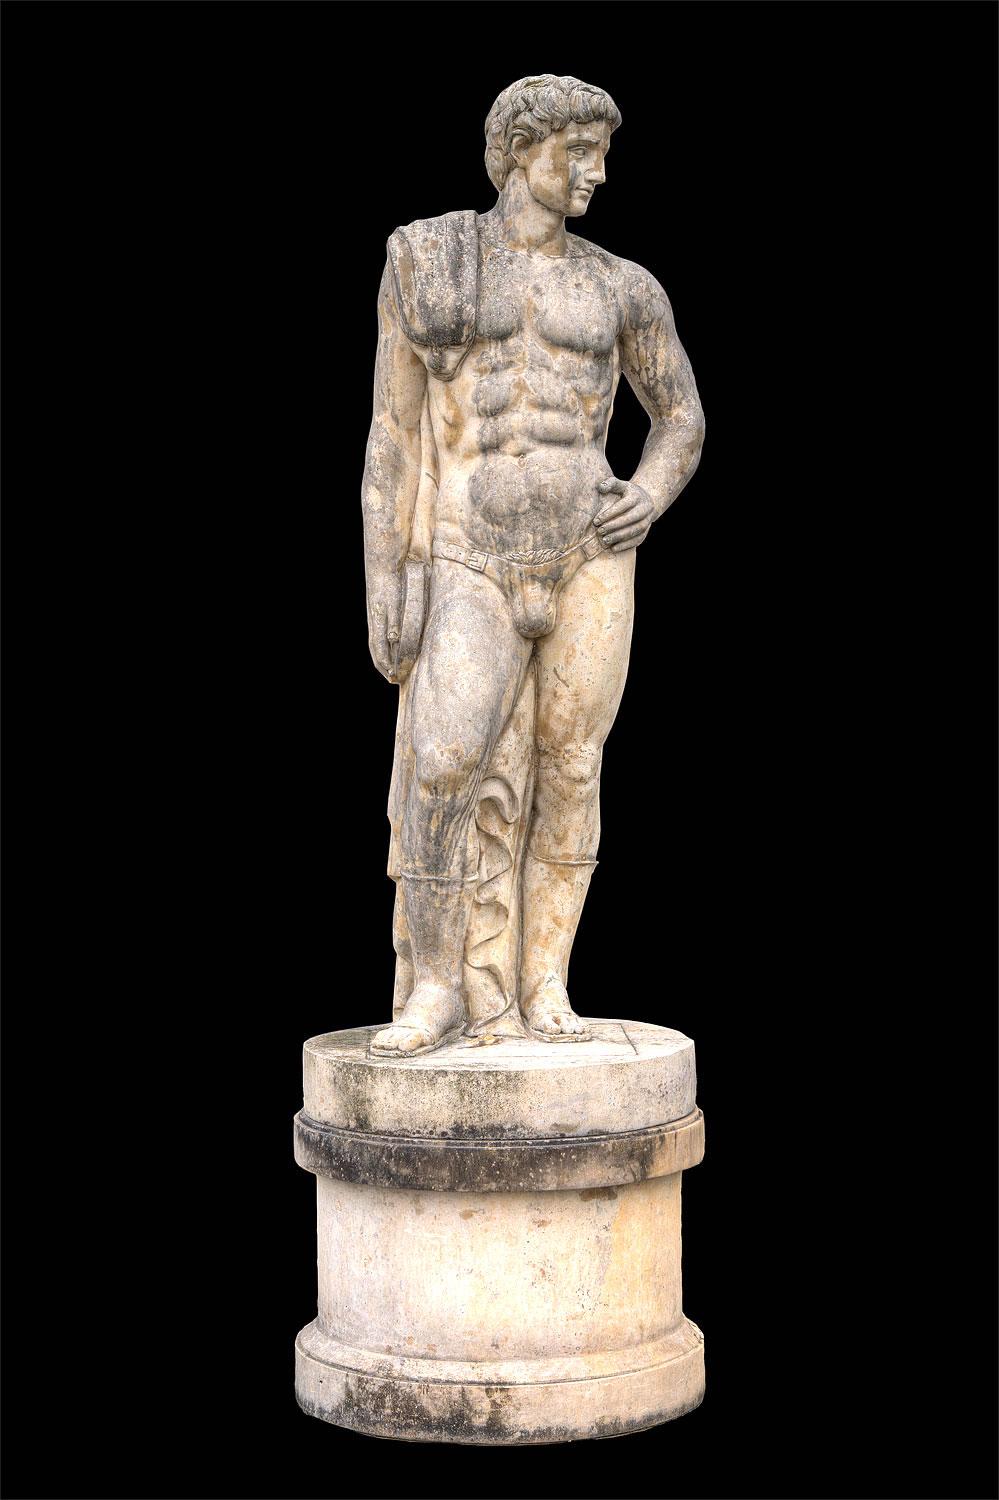  Monumental Italian Rationalist Marble Sculptures of Hercules and Discobolo For Sale 13